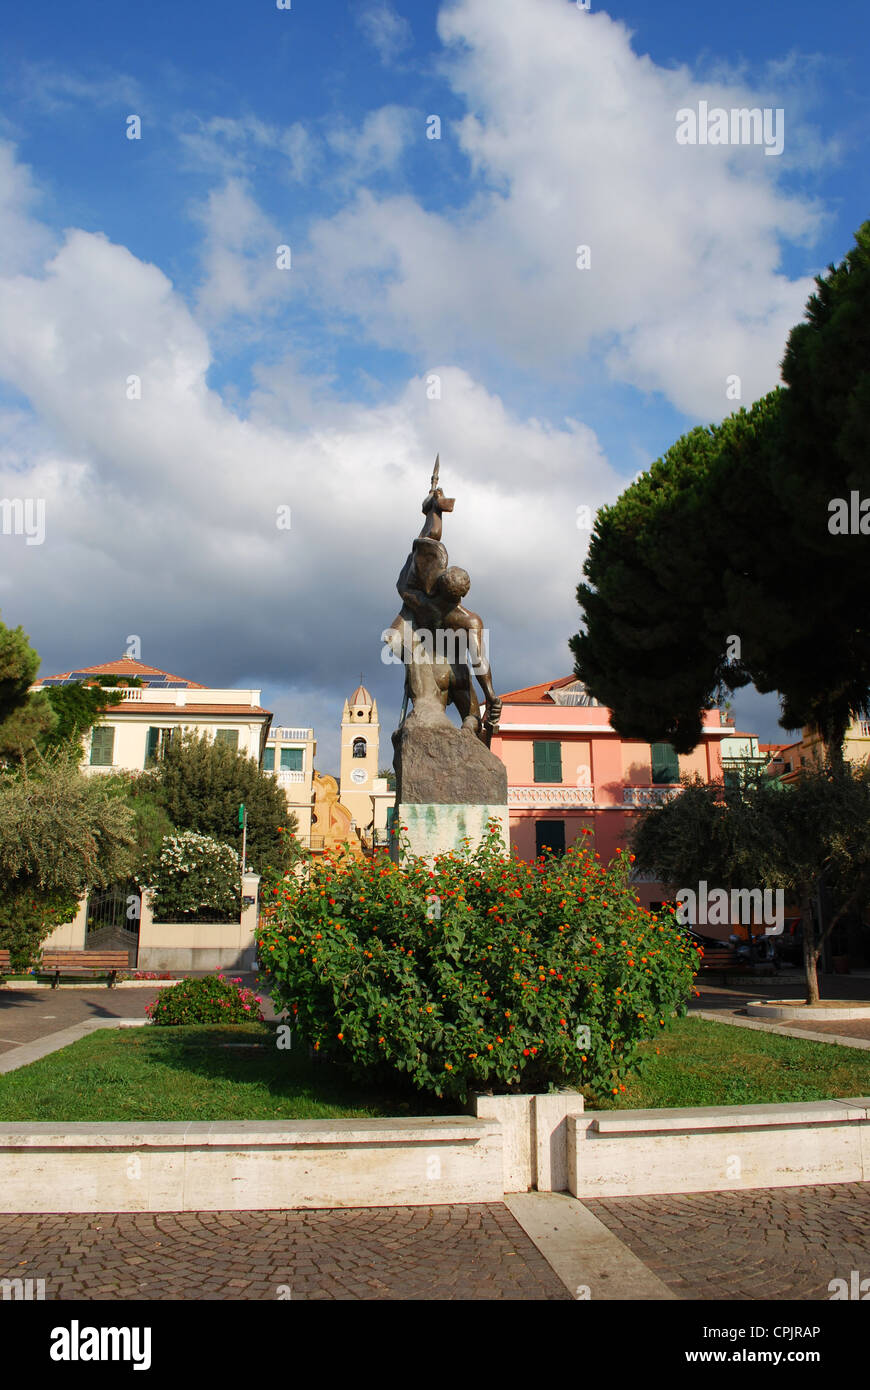 Colorful houses, statue and park, Spotorno, Liguria, Italy Stock Photo